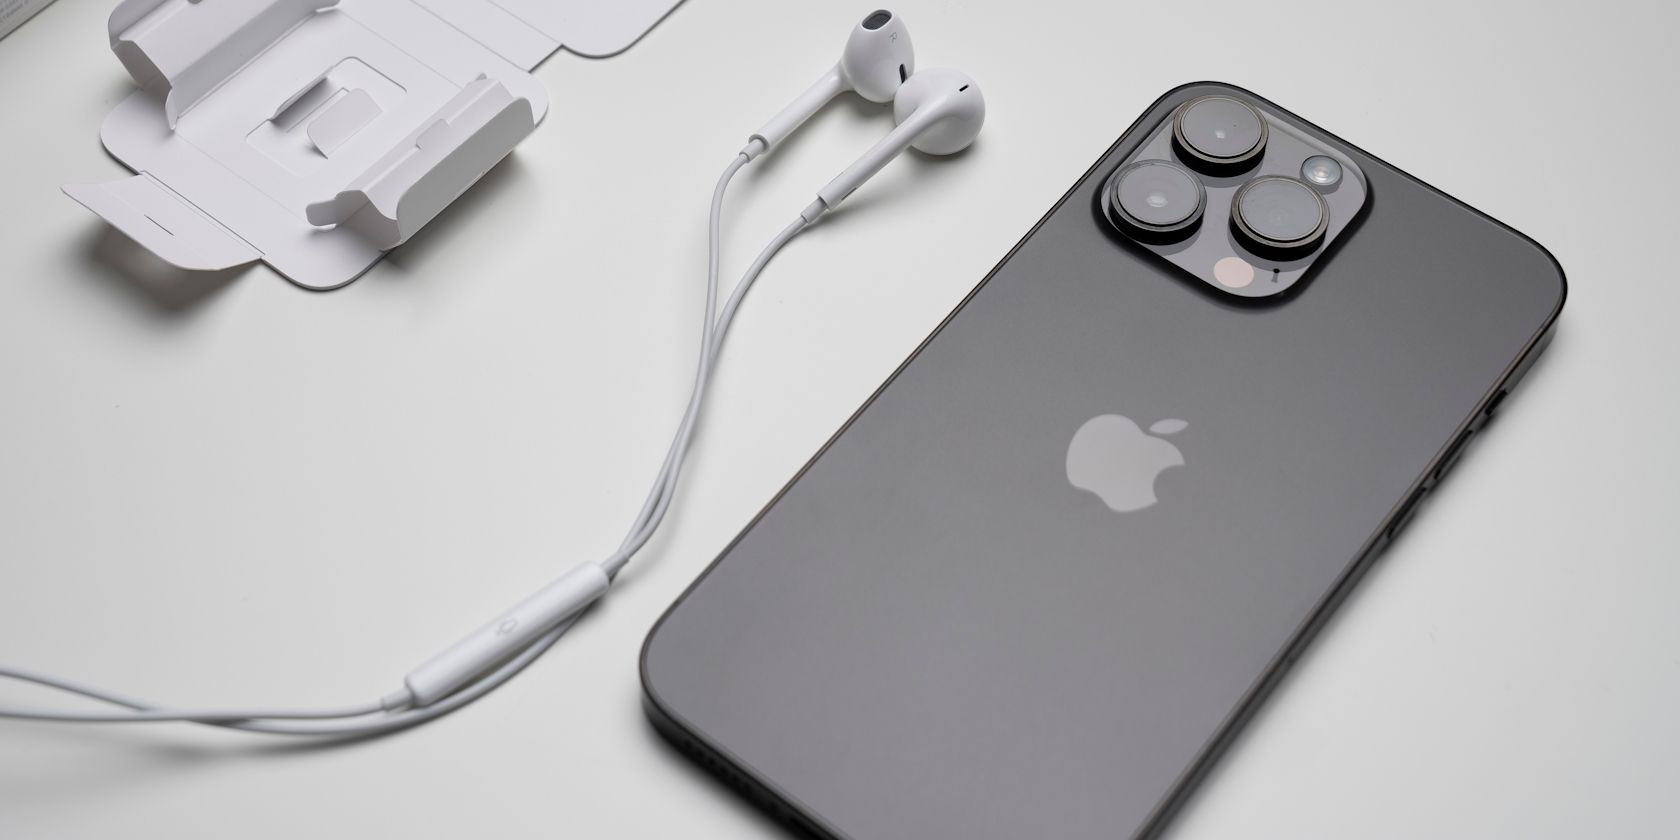 iPhone 14 Pro next to Apple EarPods on a desk